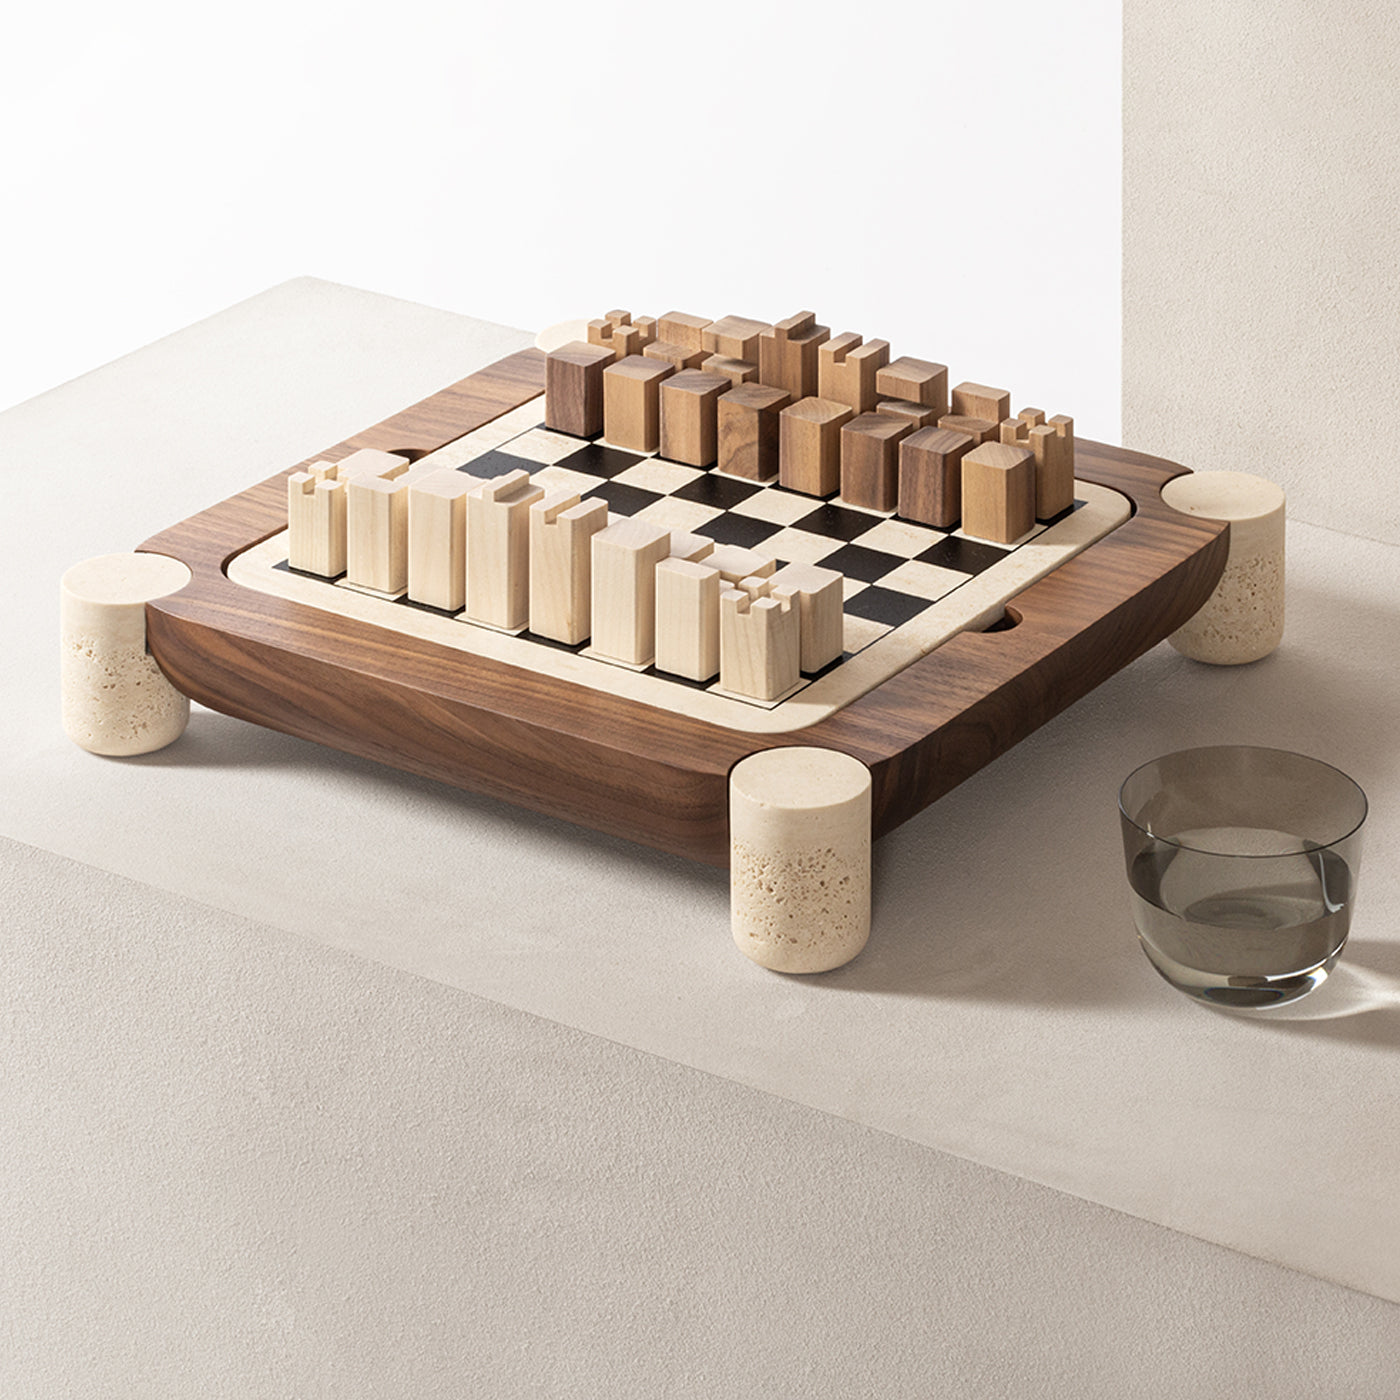 Mocambo Chess Draughts Game Set Design by Simone Fanciullacci - Vue alternative 5